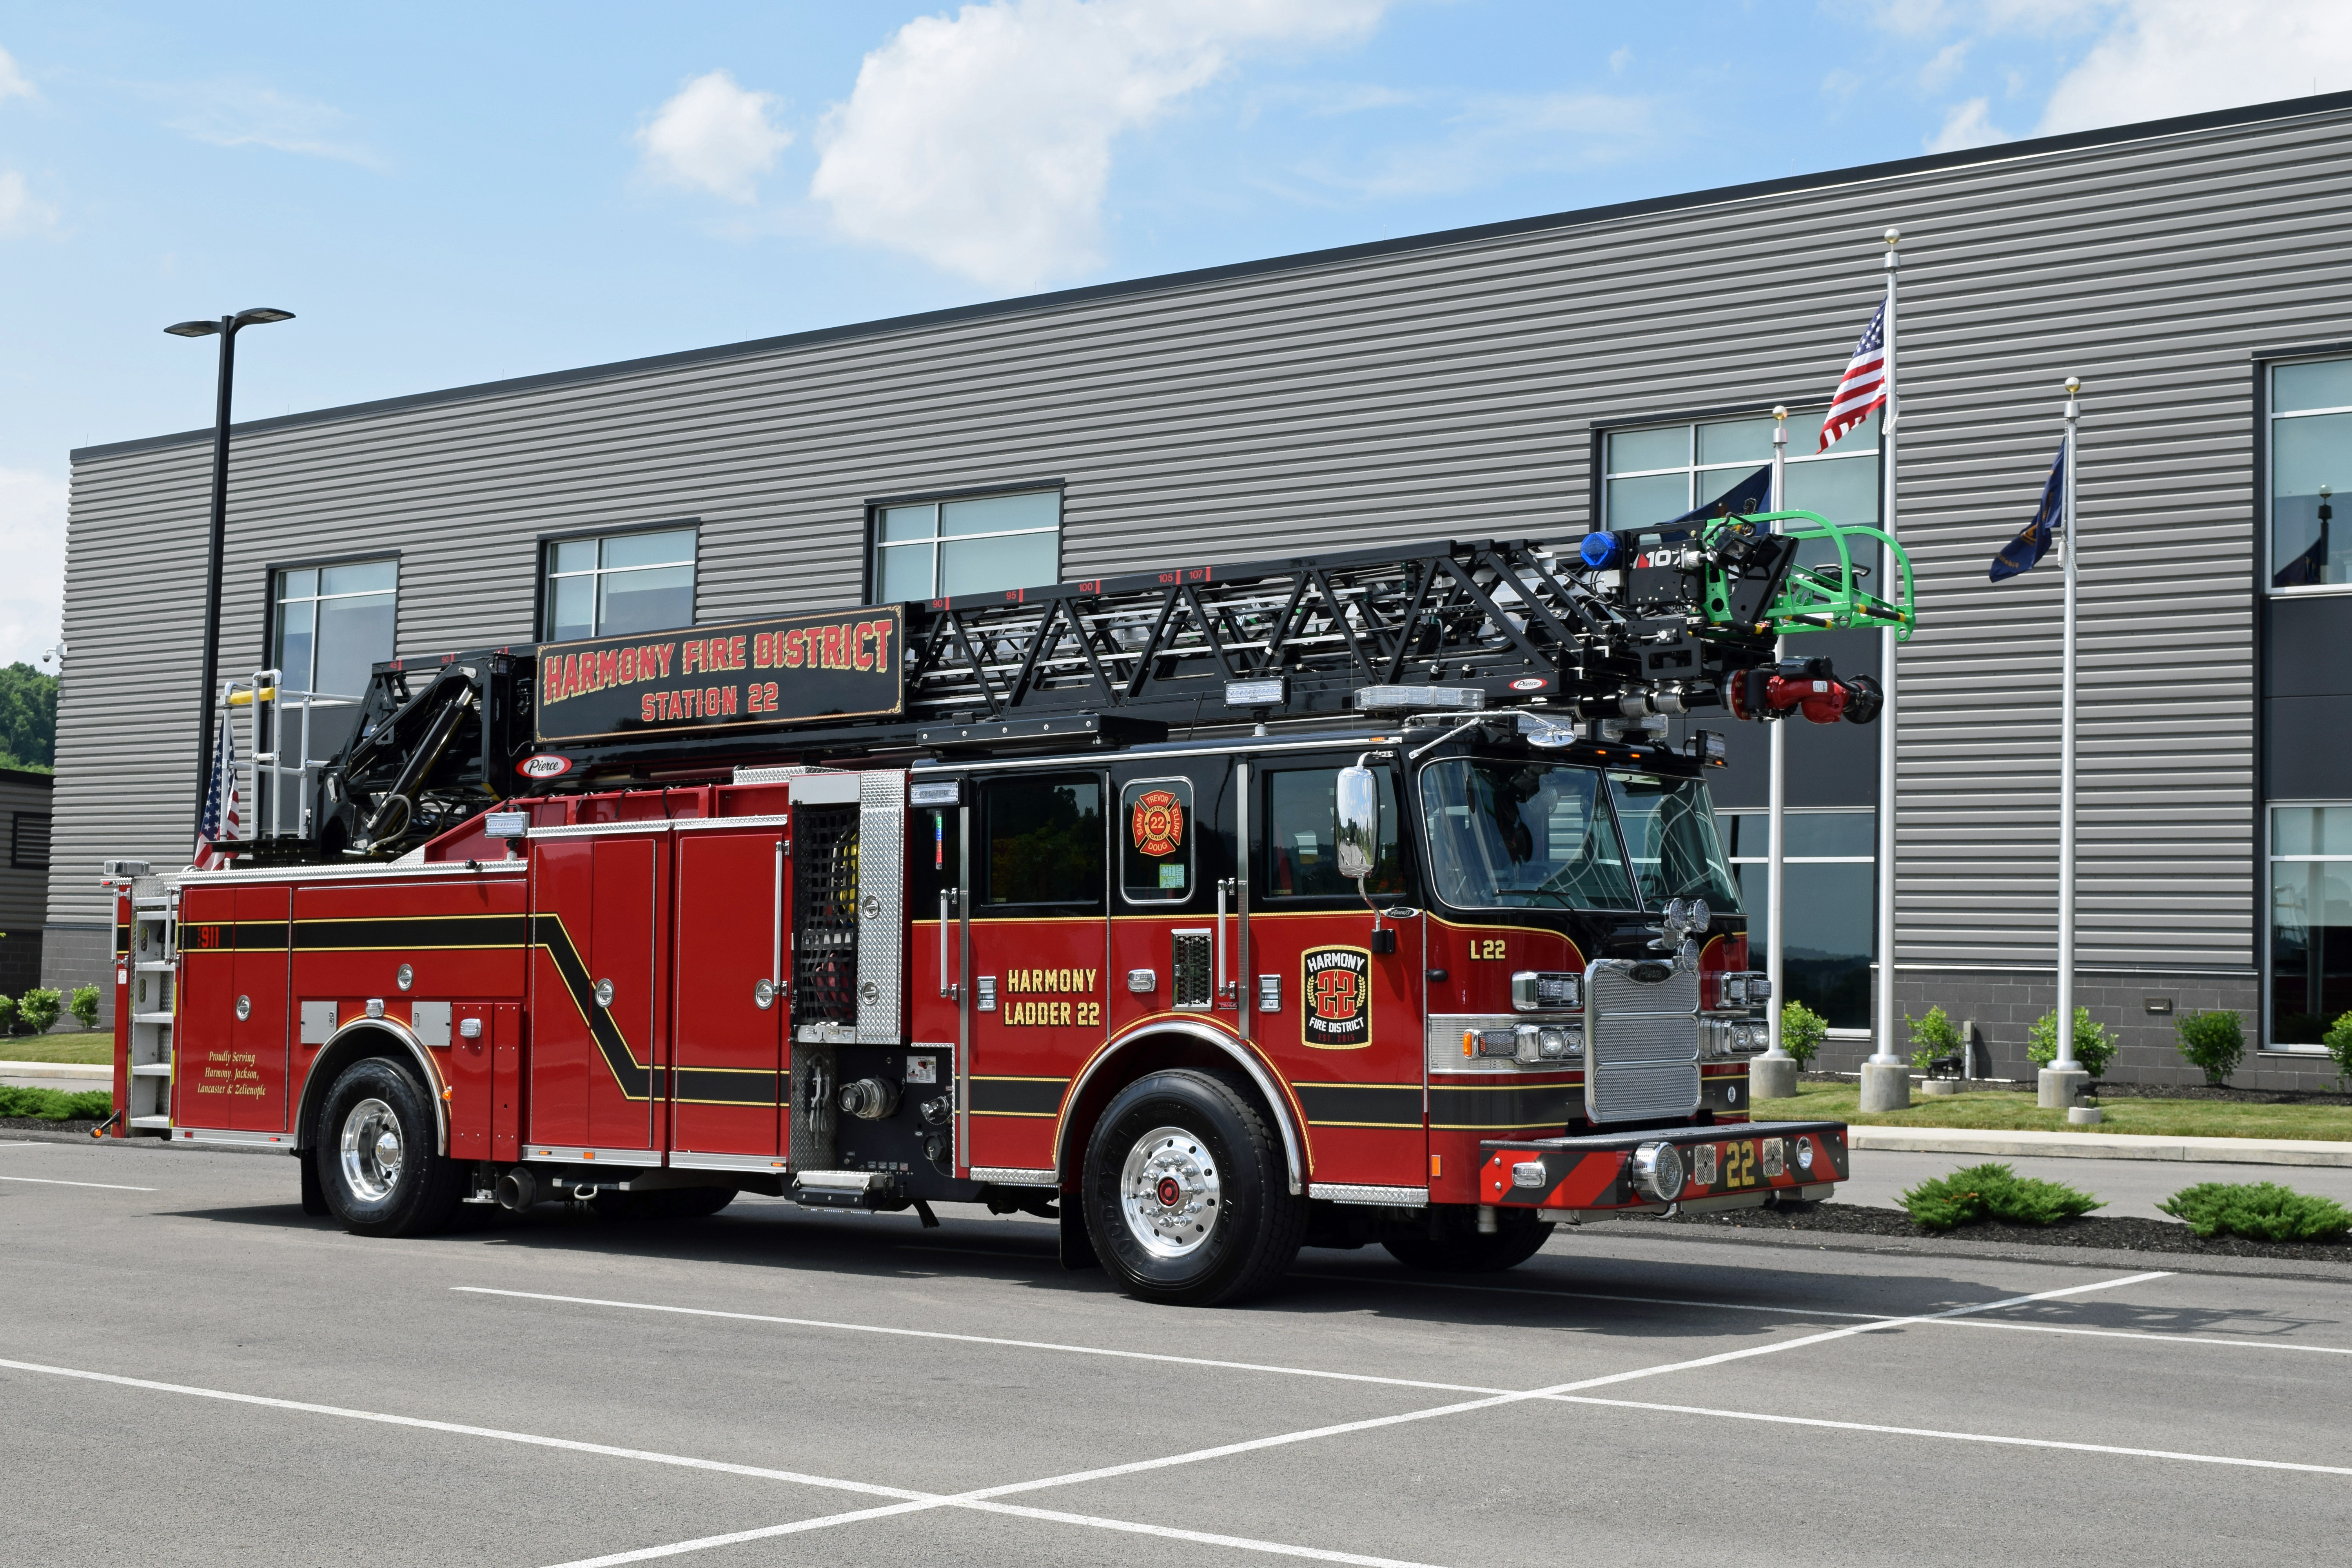 Our Apparatus – Harmony Fire District 22